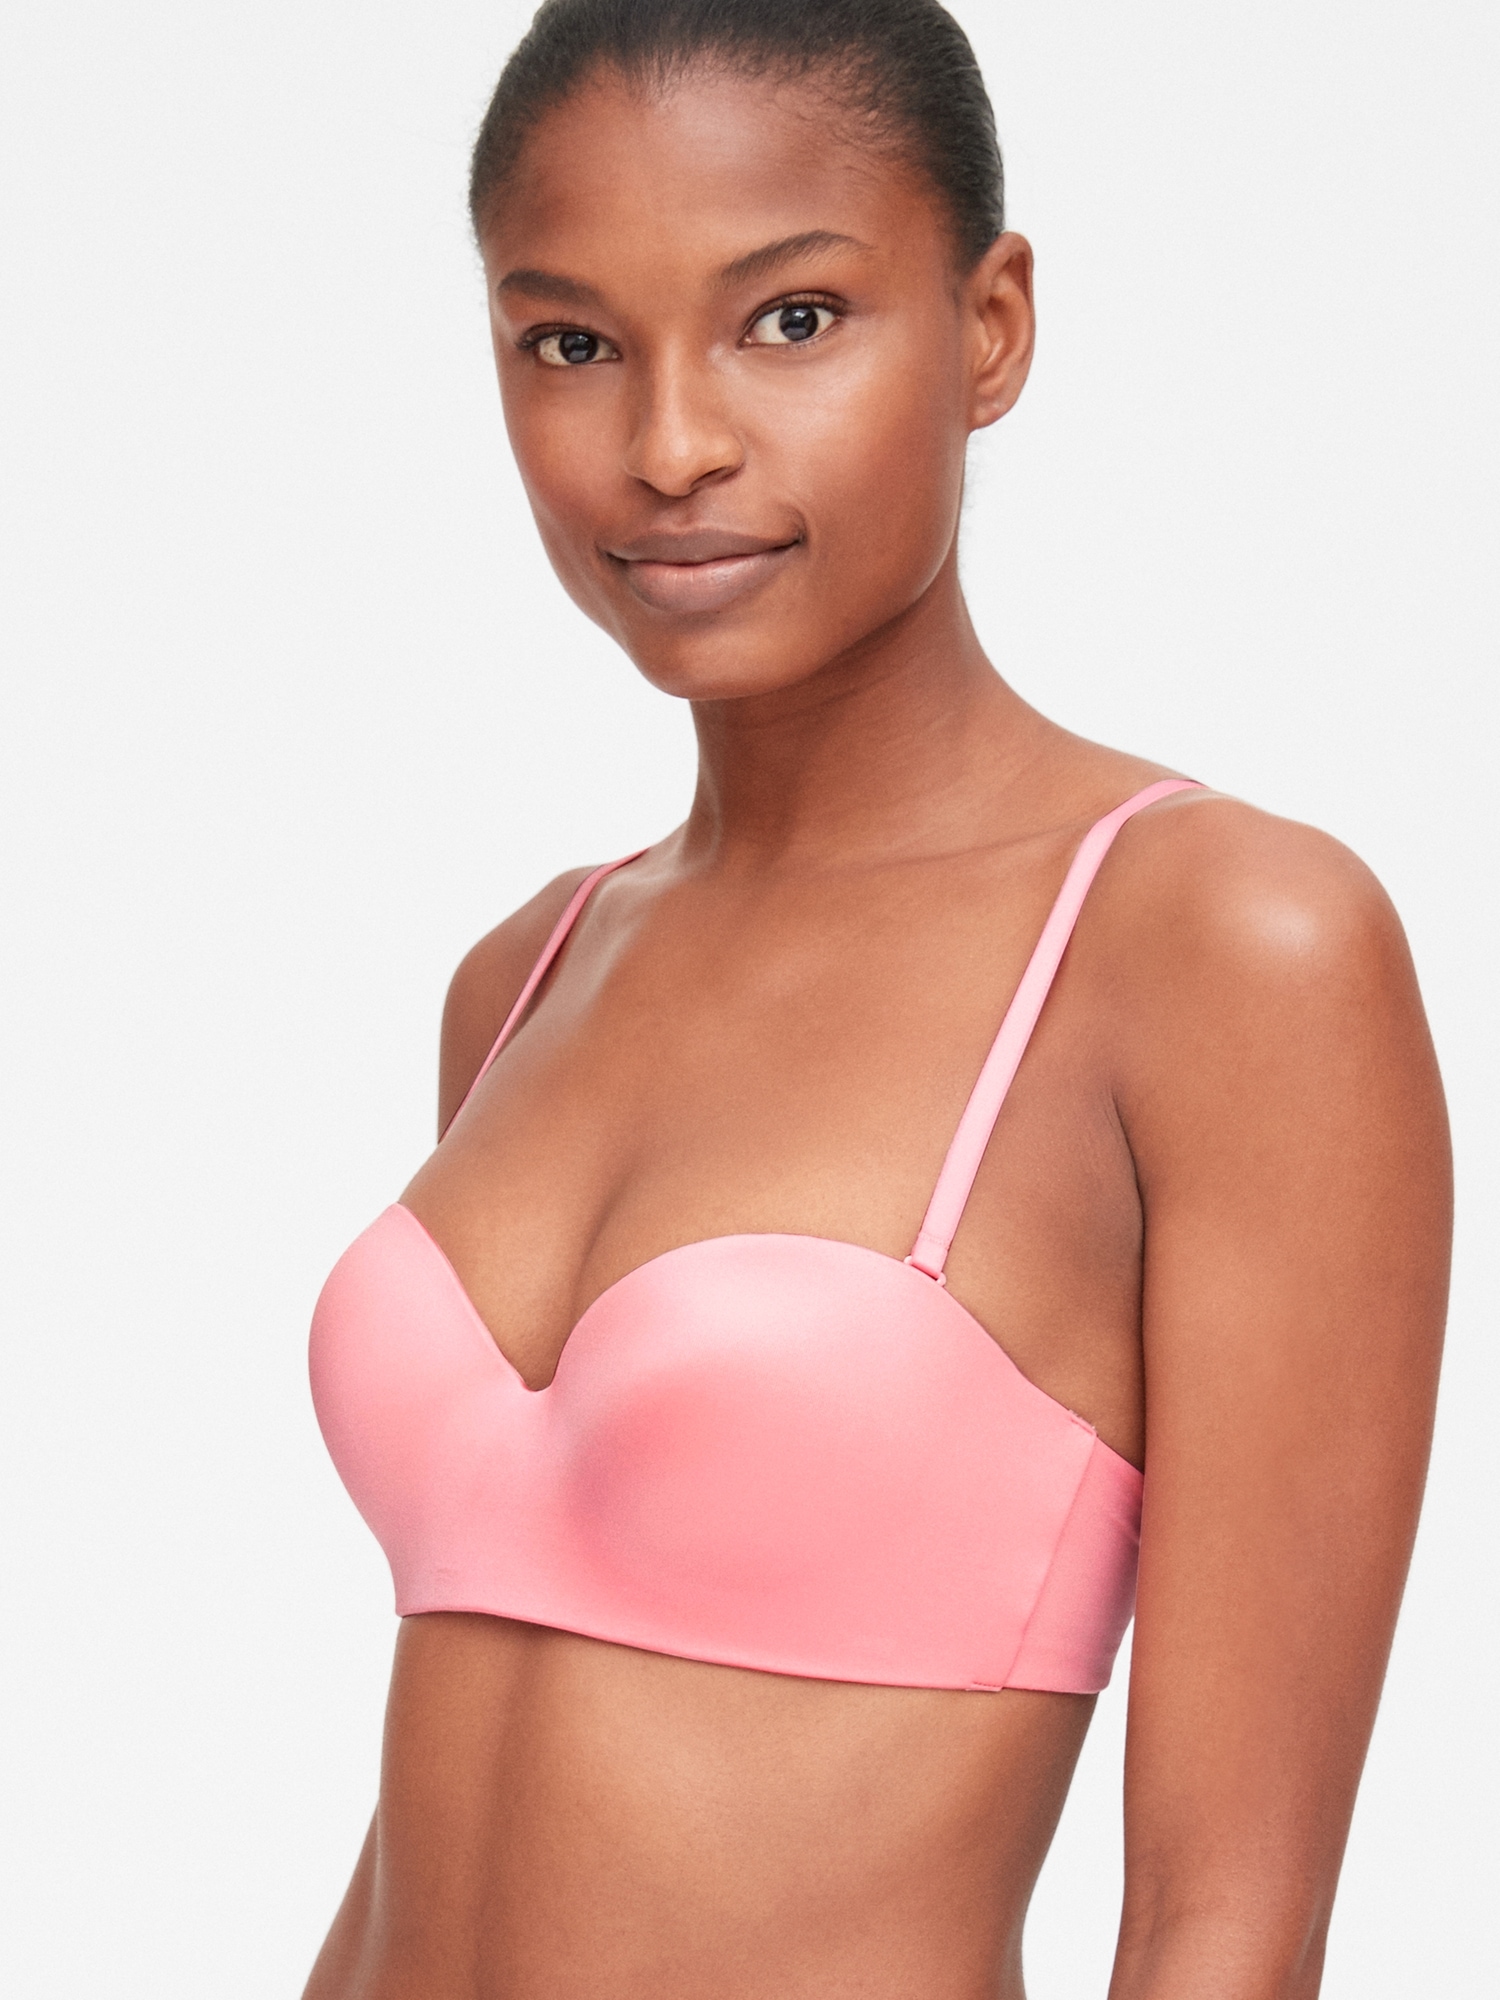 I Wear a 38DD Bra, and I Finally Found a Strapless Style That's Actually  Supportive and Comfortable